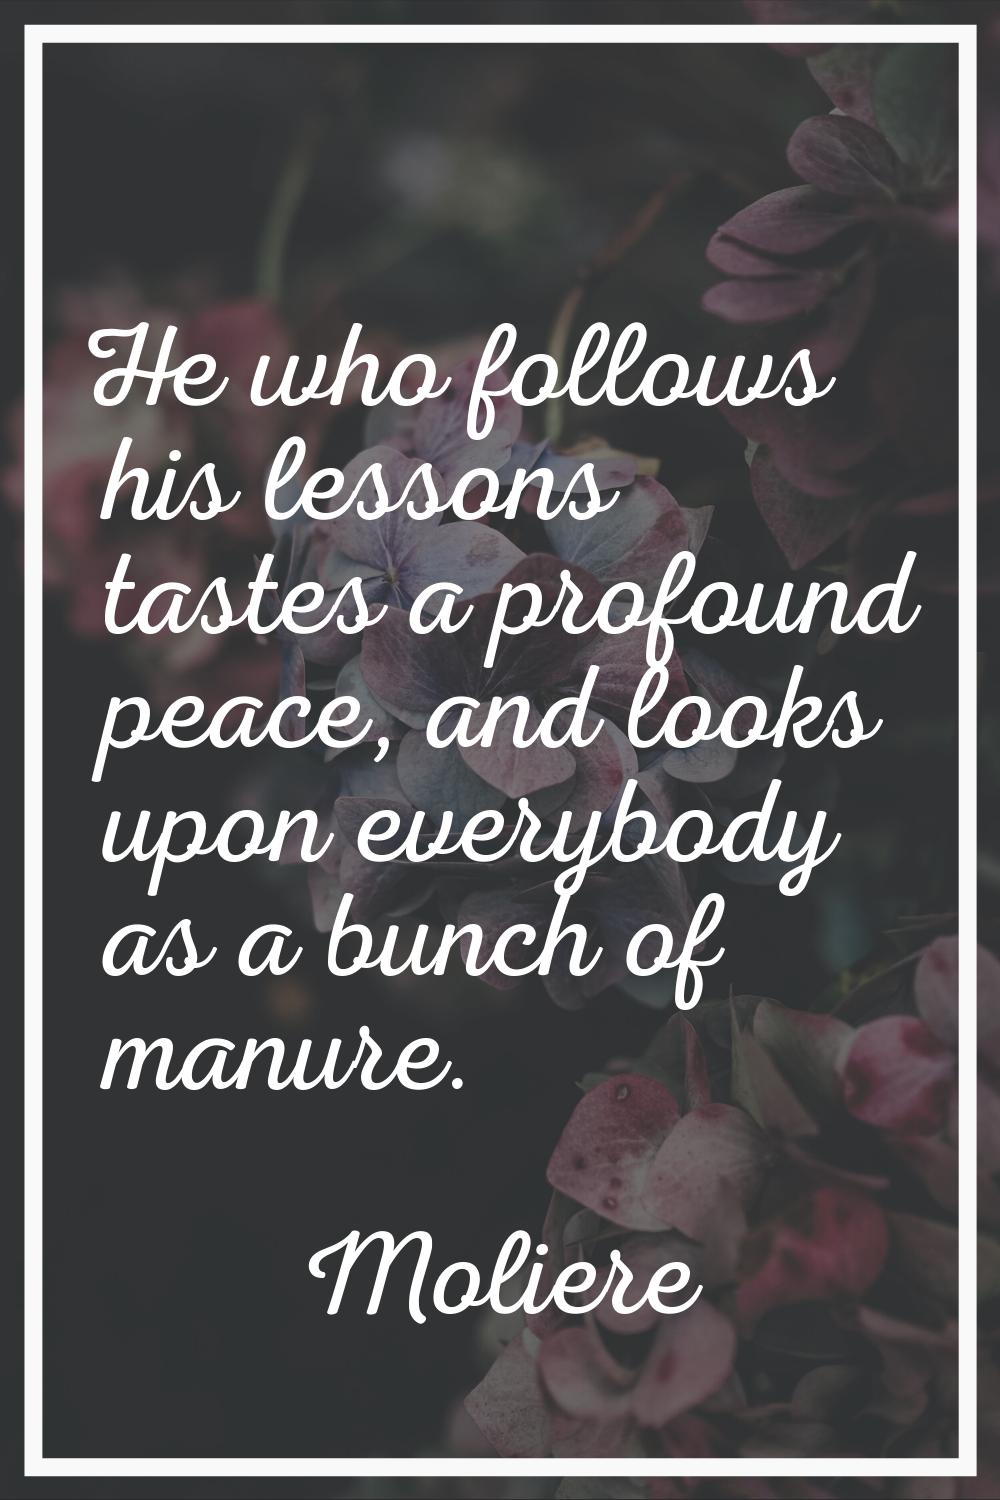 He who follows his lessons tastes a profound peace, and looks upon everybody as a bunch of manure.